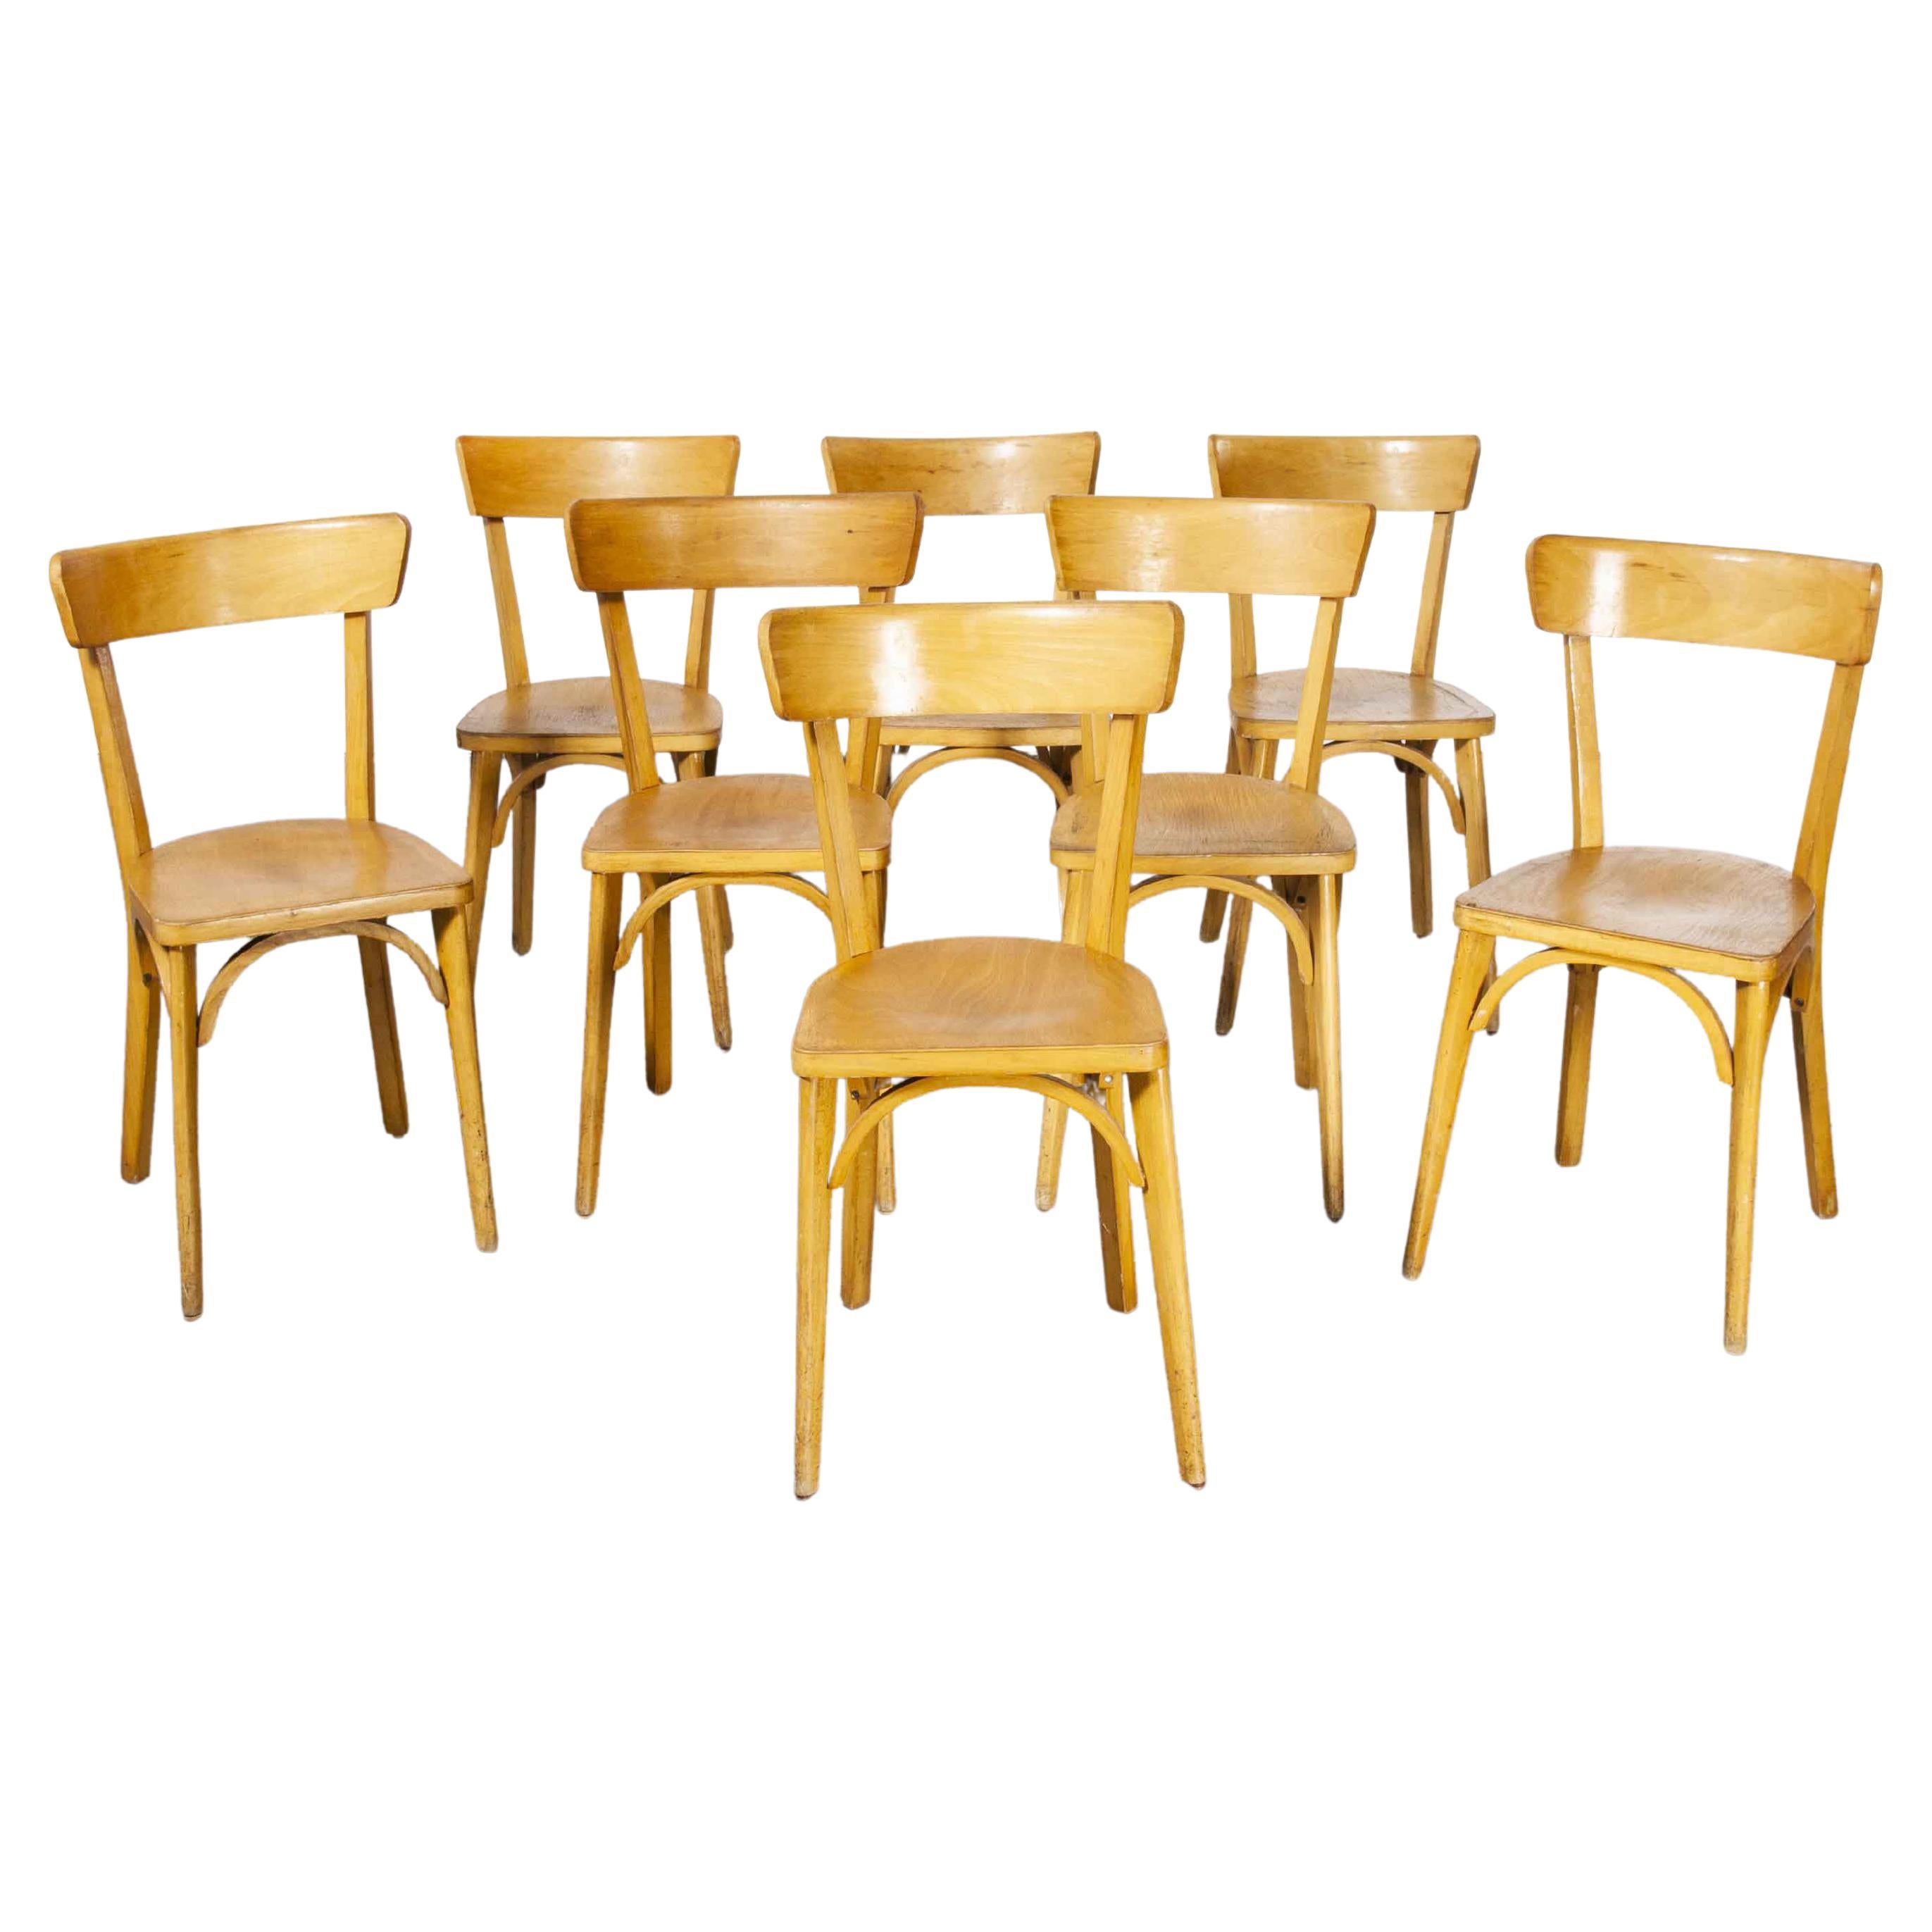 1950's French Made Luterma Bentwood Dining Chairs, Set of Eight 'Model OB'